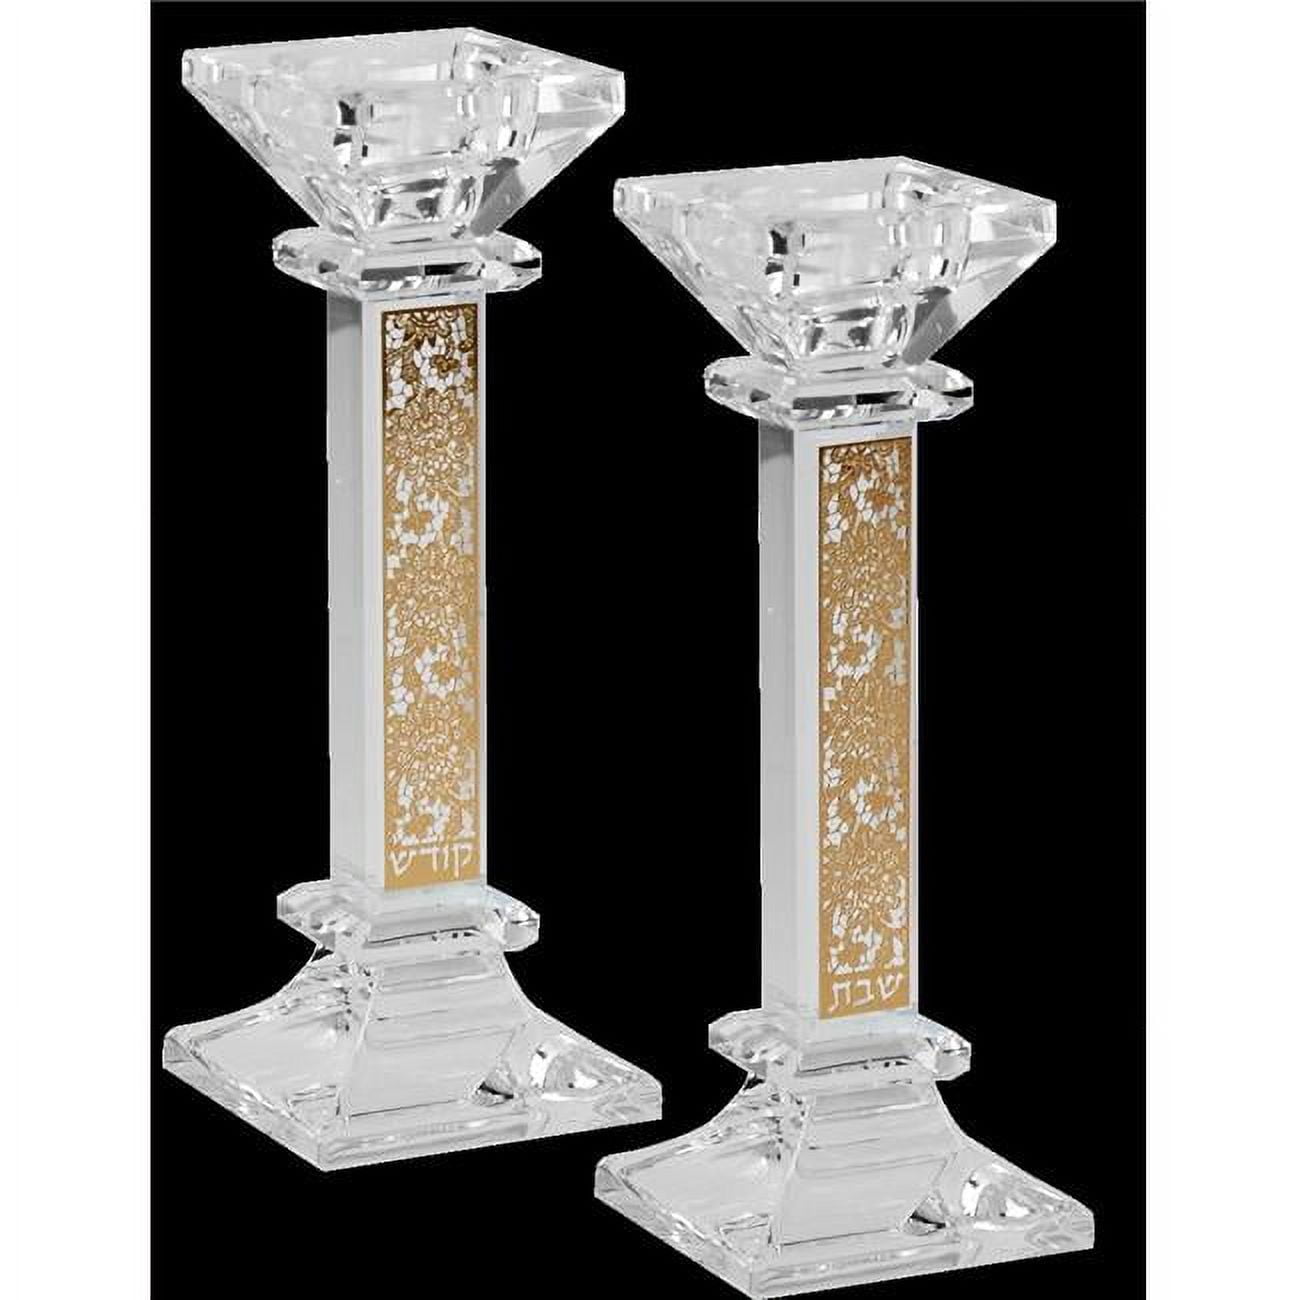 Picture of AM Judaica 165571 7 x 1 in. Candlestick Gold Floral Set